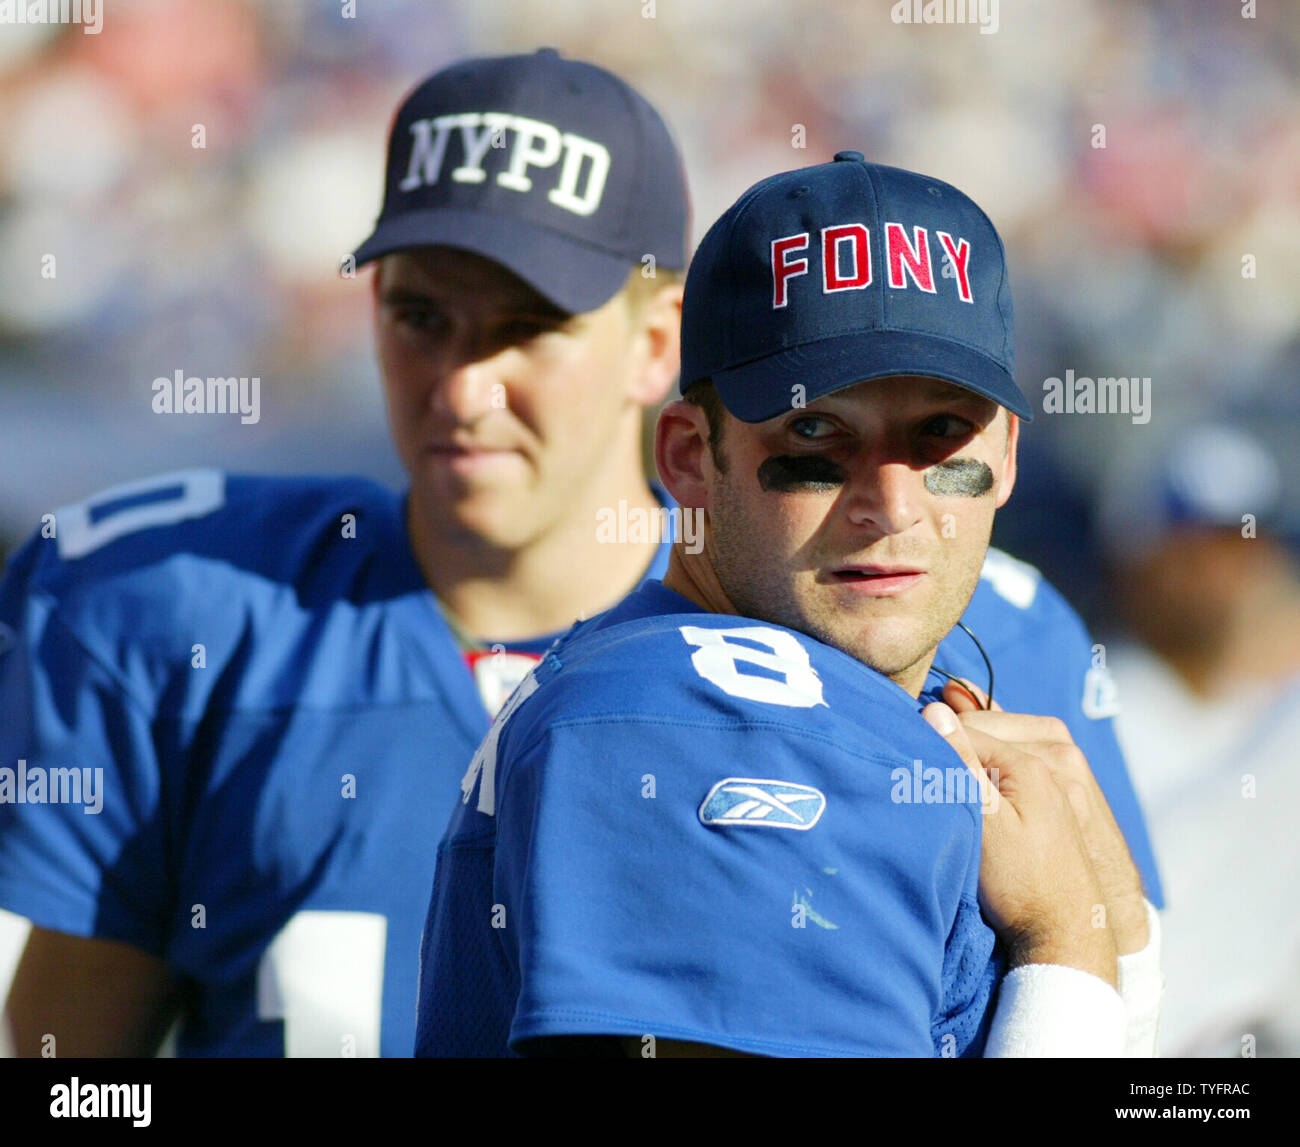 https://c8.alamy.com/comp/TYFRAC/new-york-giants-eli-manning-and-back-up-quarterback-tim-hasselbeck-wear-nypd-and-fdny-hats-on-the-sidelines-the-new-york-giants-hosted-the-arizona-cardinals-in-week-1-at-giants-stadium-in-east-rutherford-new-jersey-on-september-11-2005-upi-photojohn-angelillo-TYFRAC.jpg